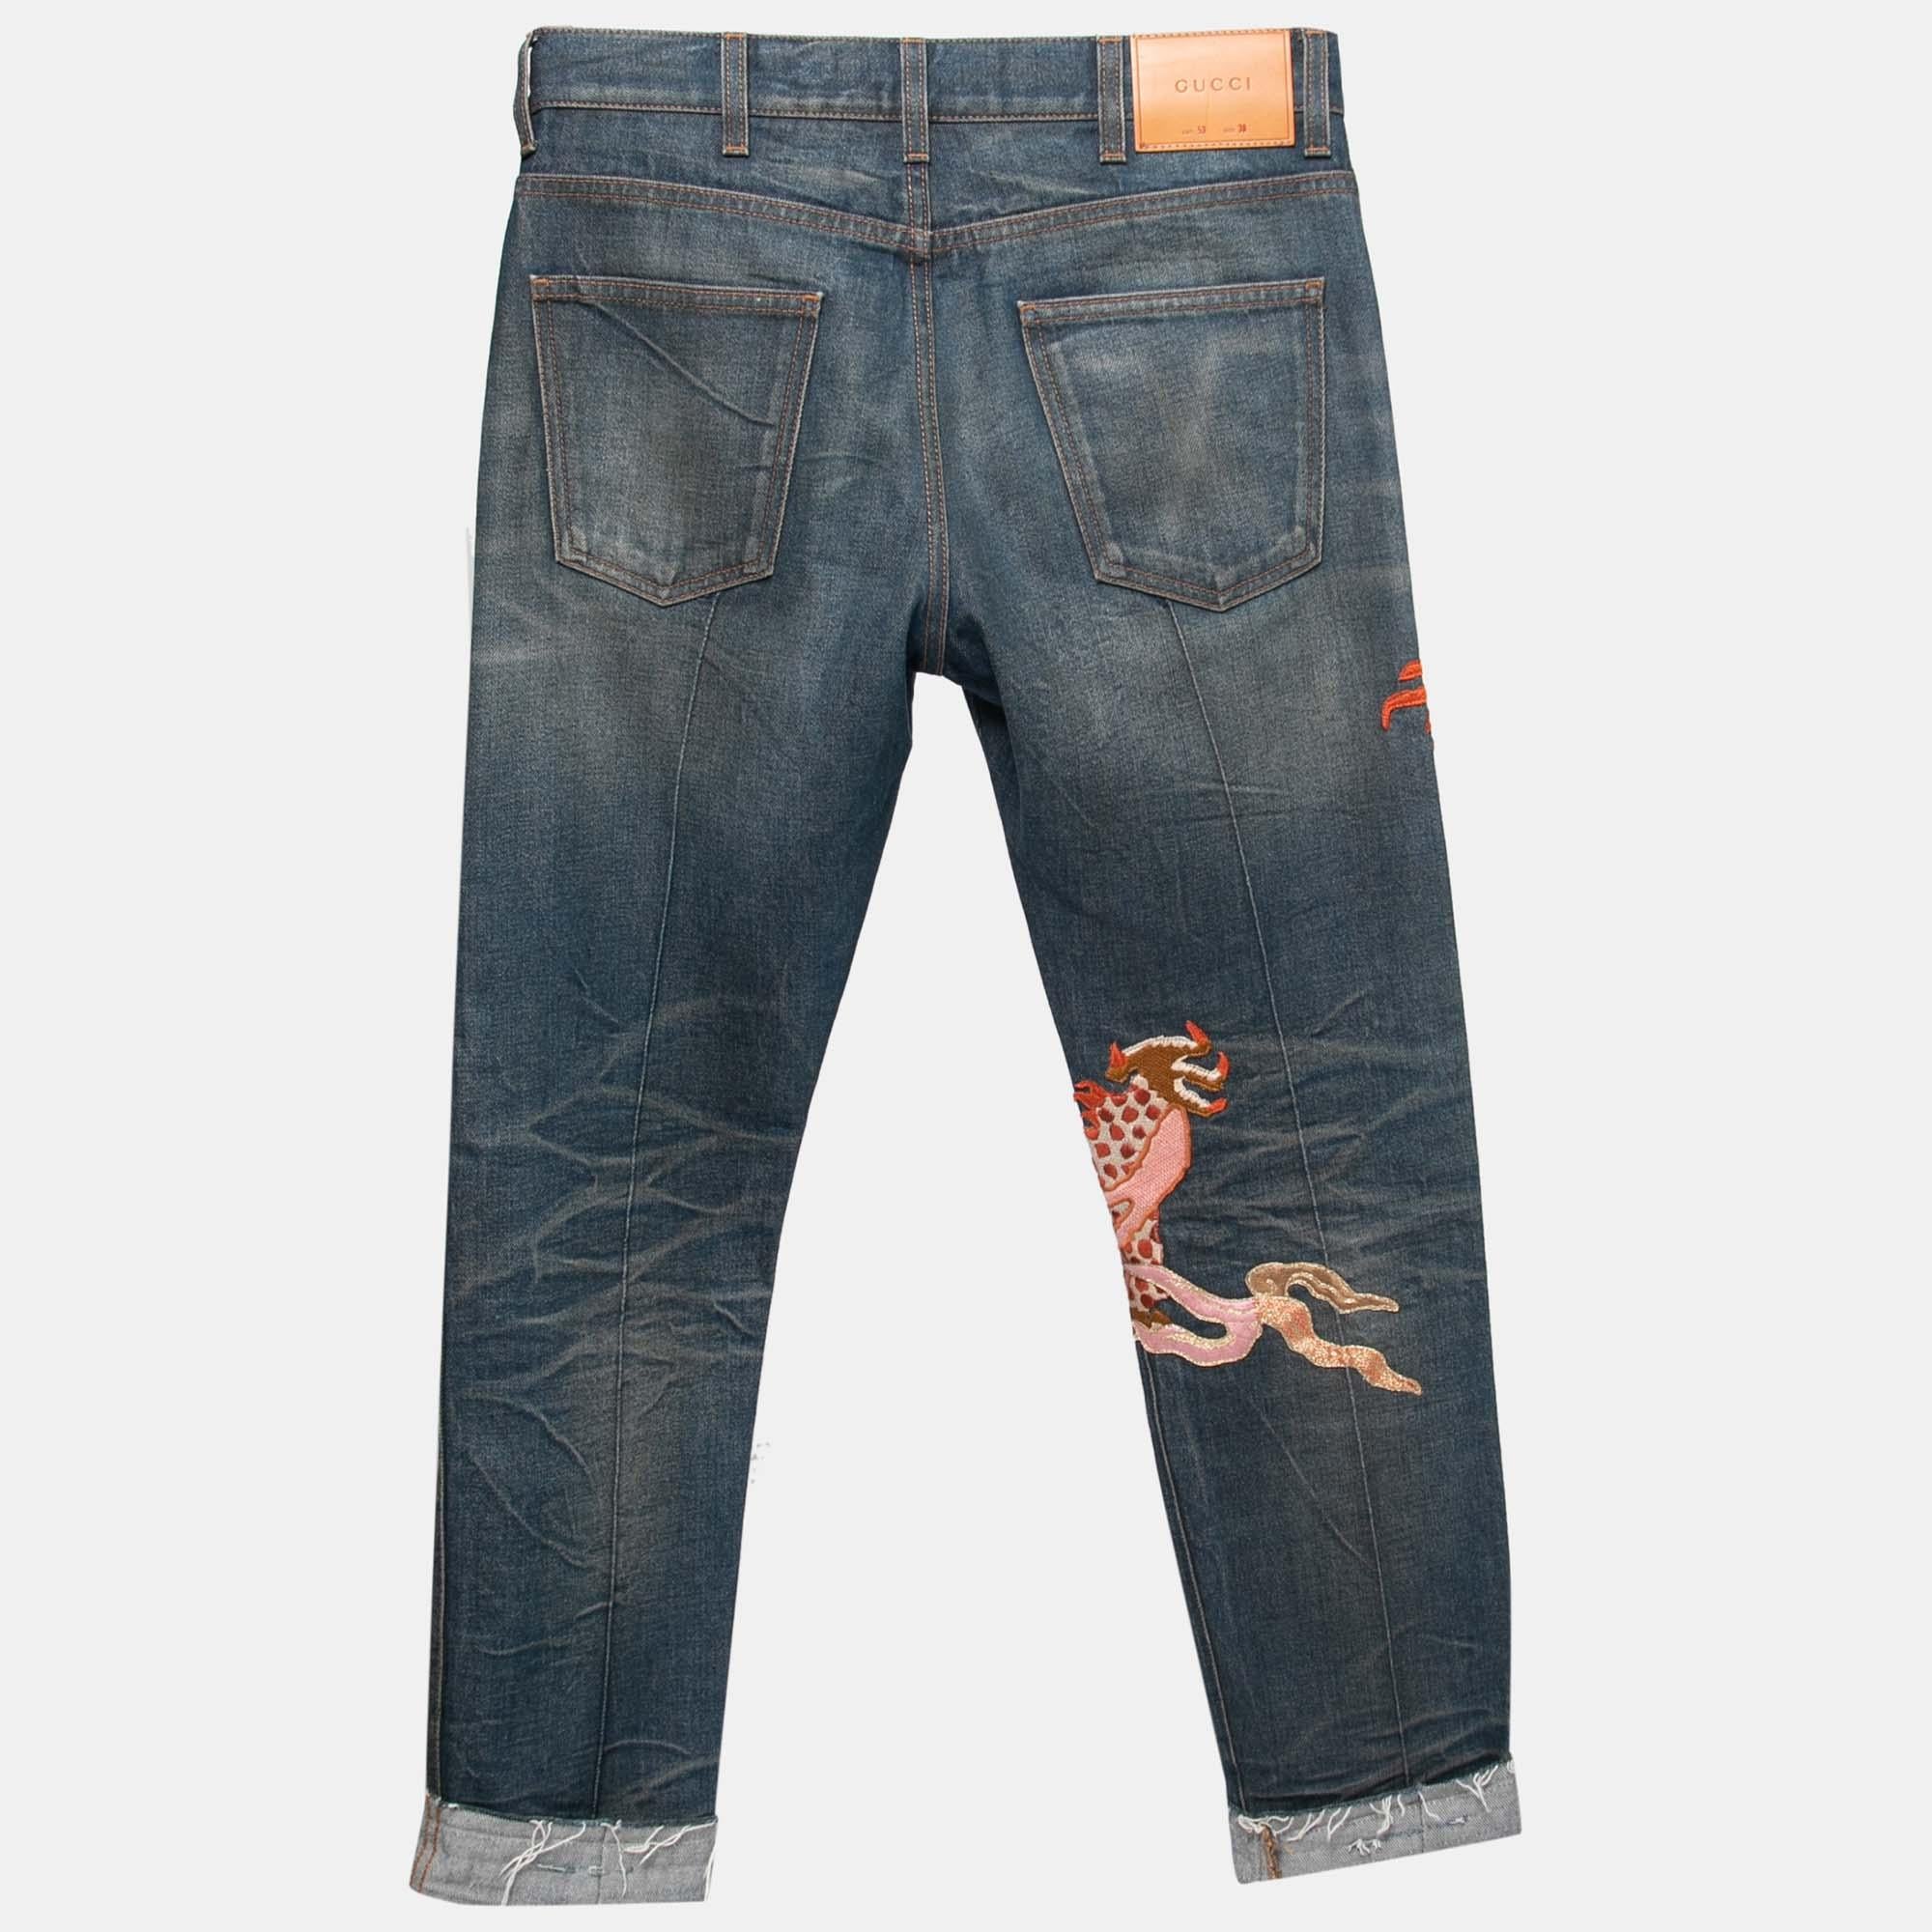 These jeans from Gucci are definitely a closet essential. They are tailored using blue stone-washed denim fabric, which displays dragon embroidery. They have been provided with a zipper closure and five pockets. Flaunt a comfy casual look with these